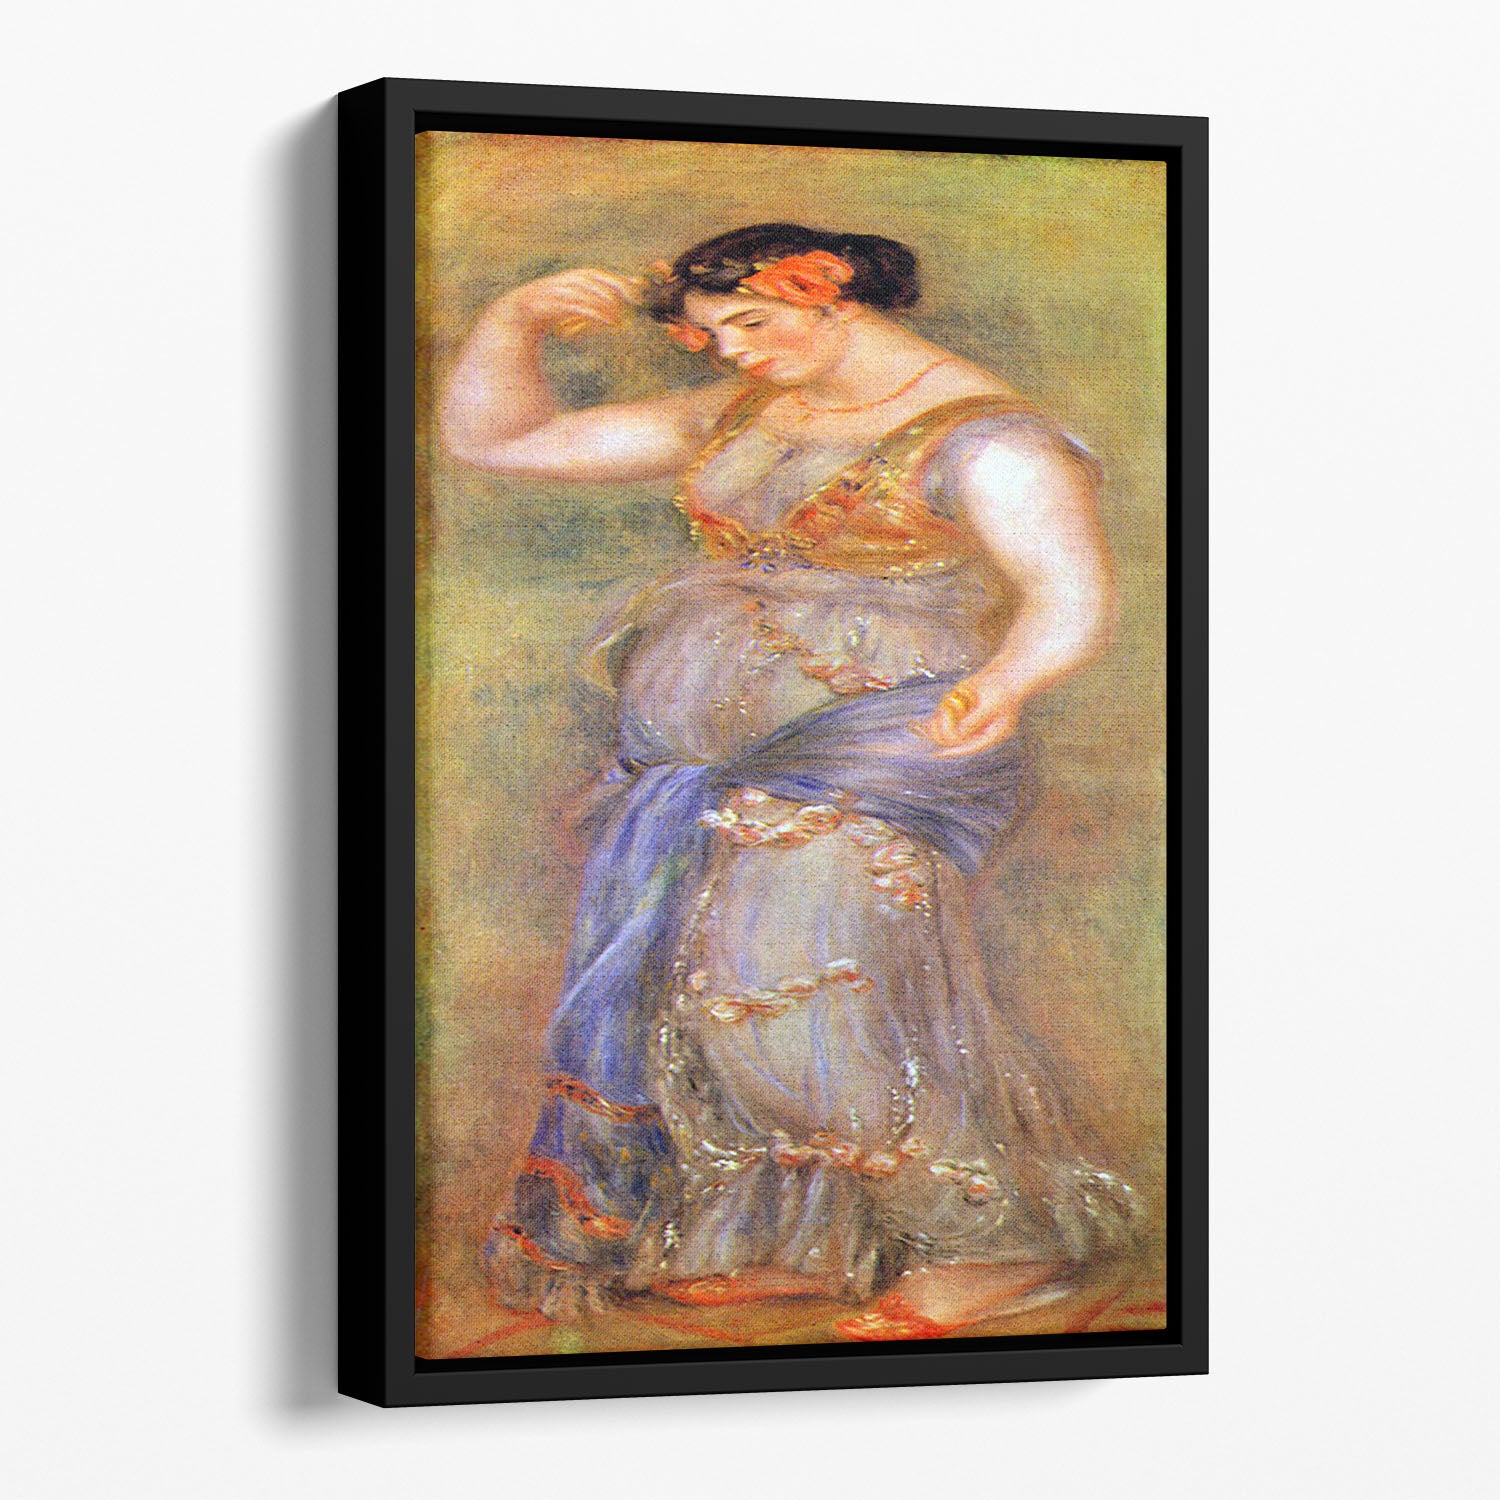 Dancer with castanets by Renoir Floating Framed Canvas